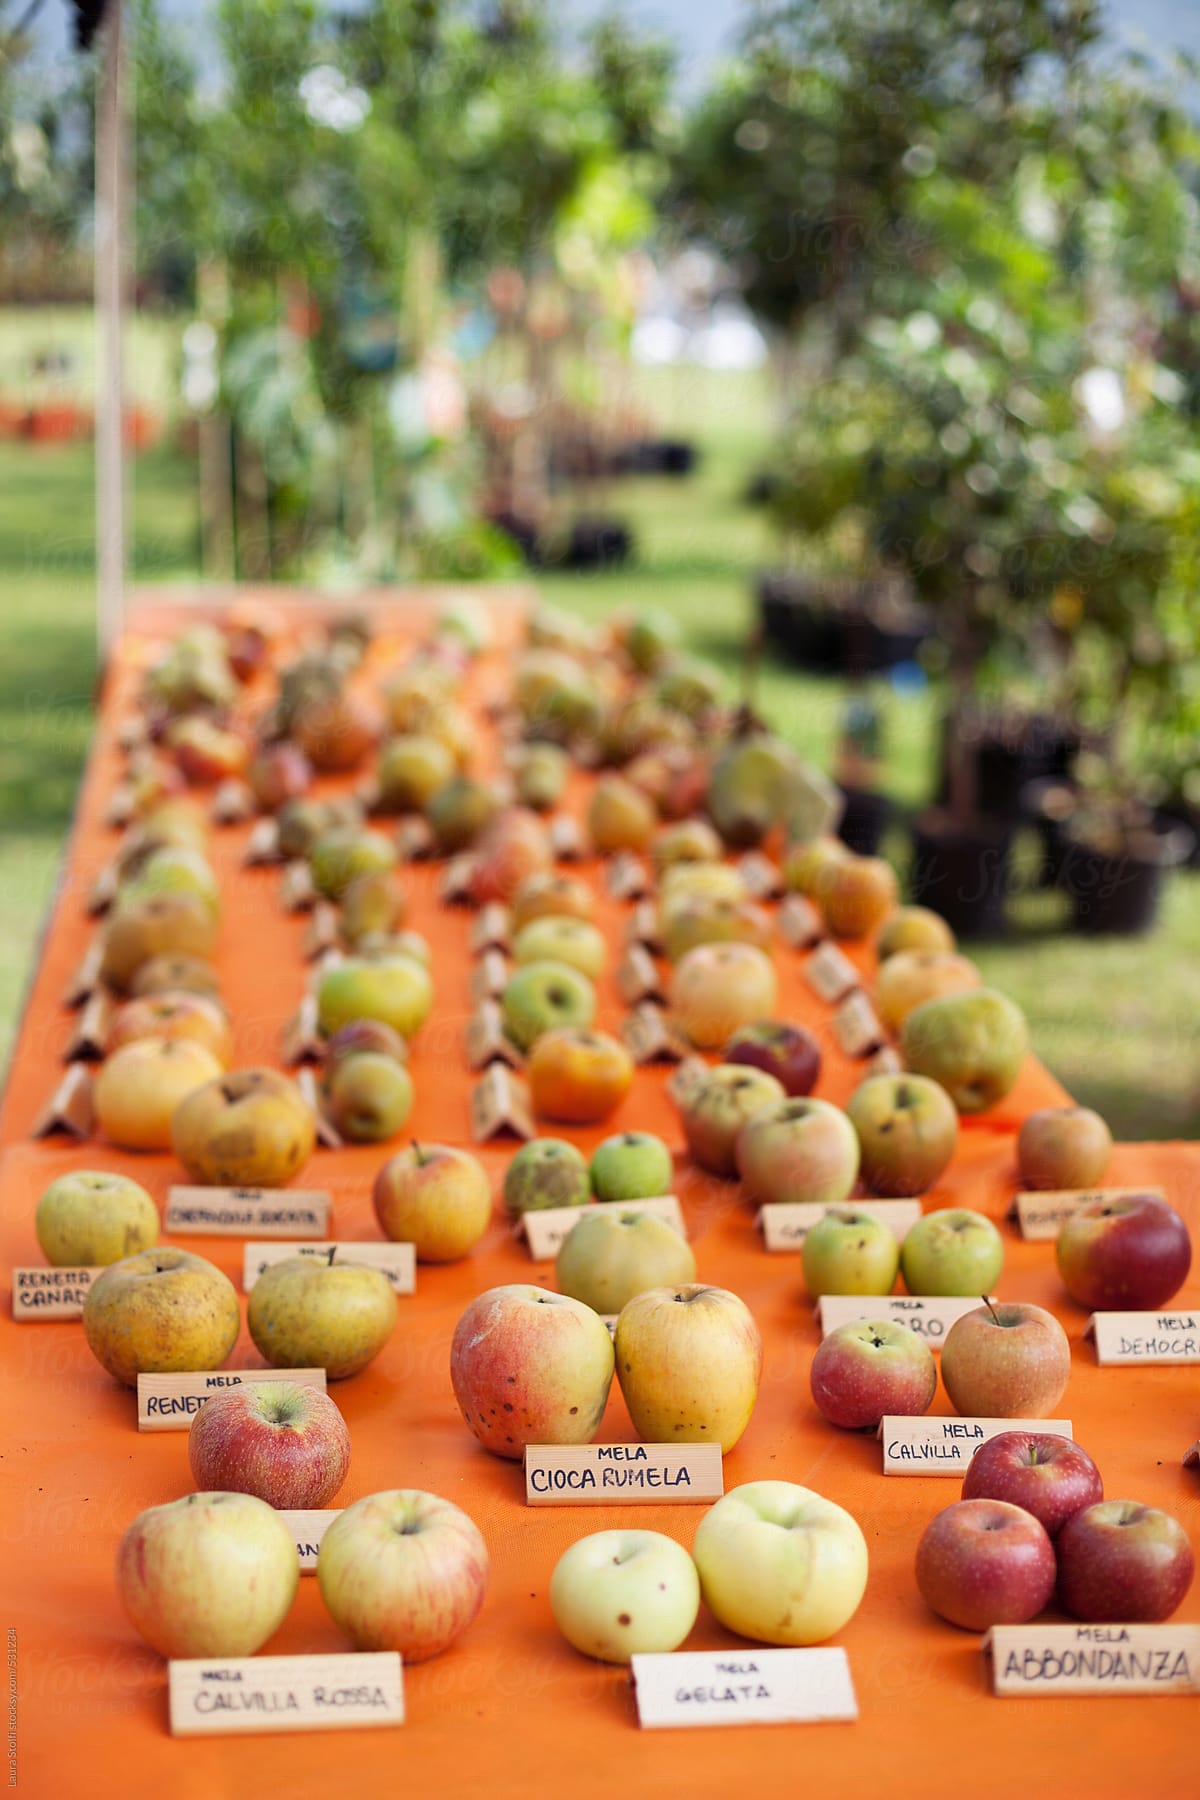 Italy, ancient fruit fair: table with many different kinds of ancient cultivar of apples